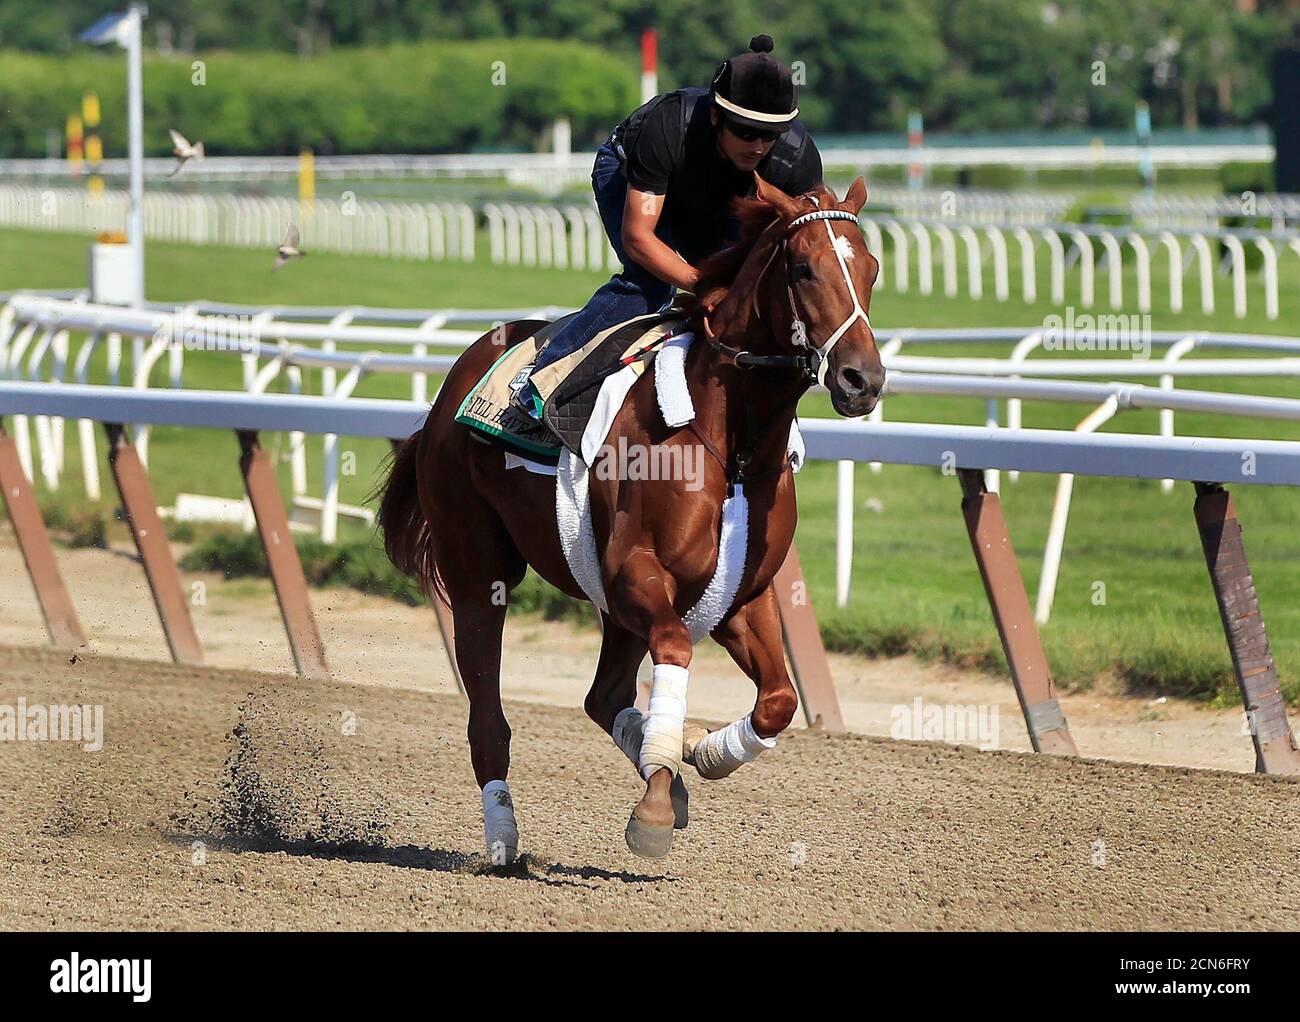 Triple Crown hopeful I'll Have Another gallops during morning workout at Belmont Park in Elmont, New York, June 1, 2012.    REUTERS/Shannon Stapleton (UNITED STATES - Tags: SPORT HORSE RACING ANIMALS) Stock Photo